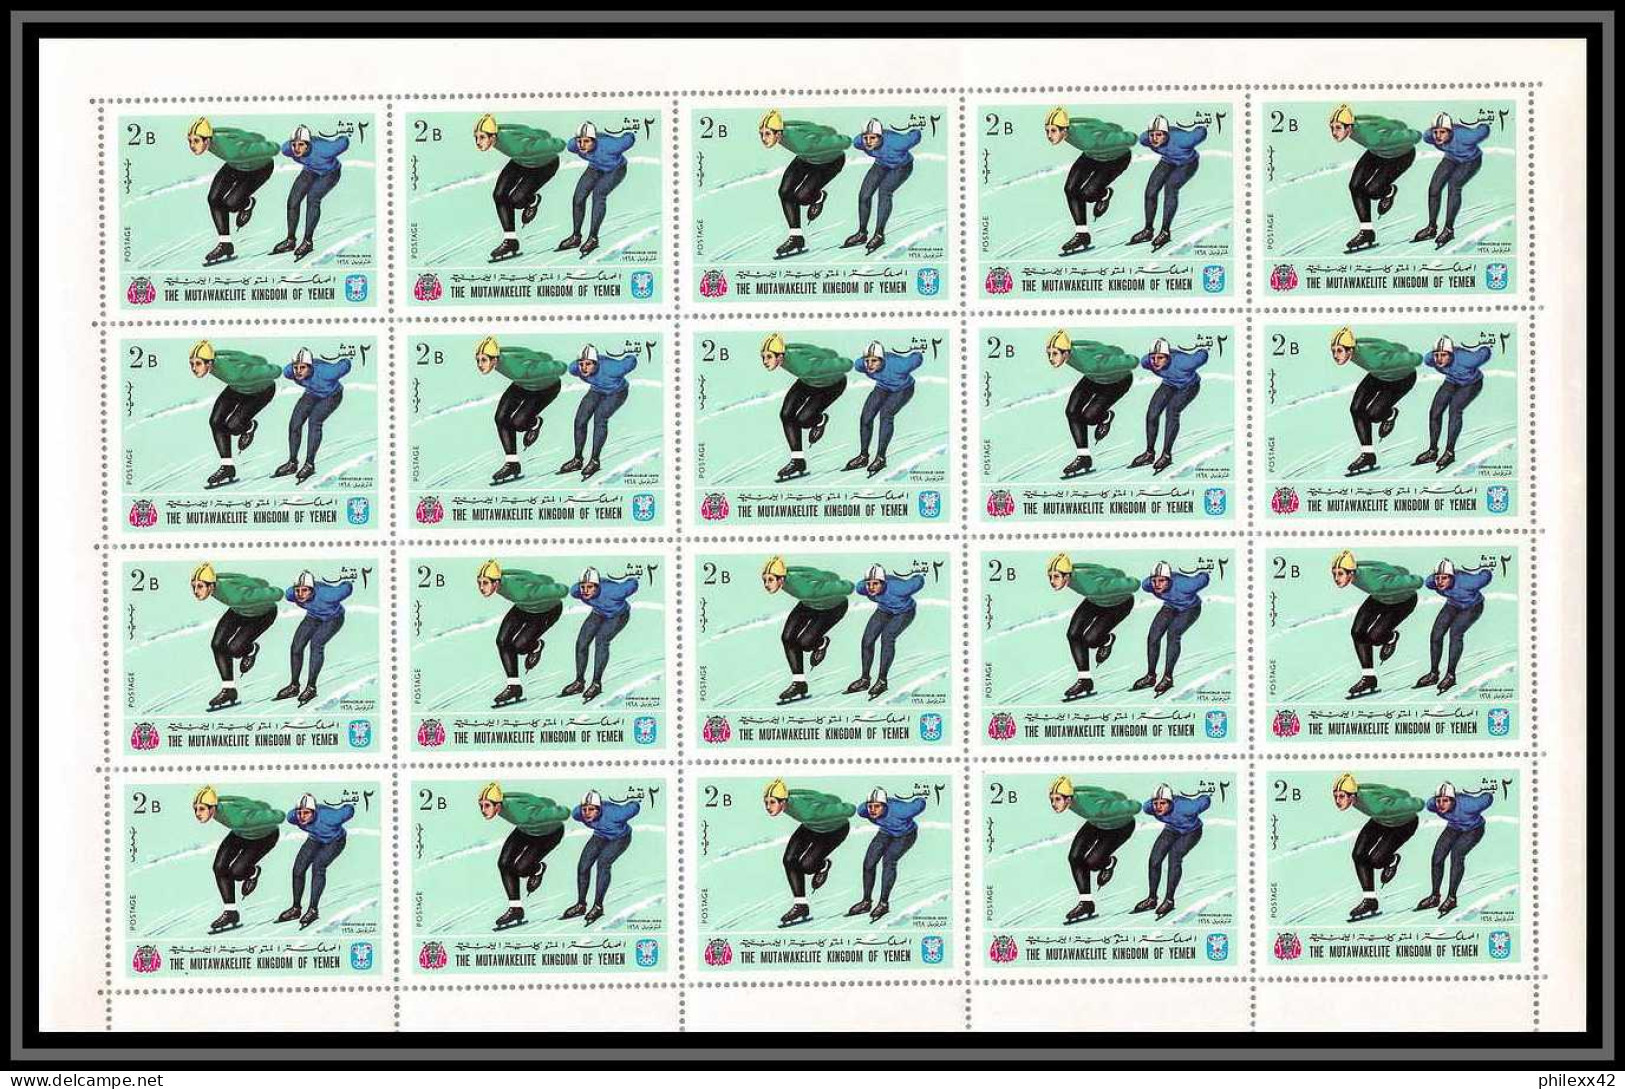 134b - Yemen royaume MNH ** Mi N° 454 / 463 A jeux olympiques (winter olympic games) grenoble 1968 feuilles (sheets)